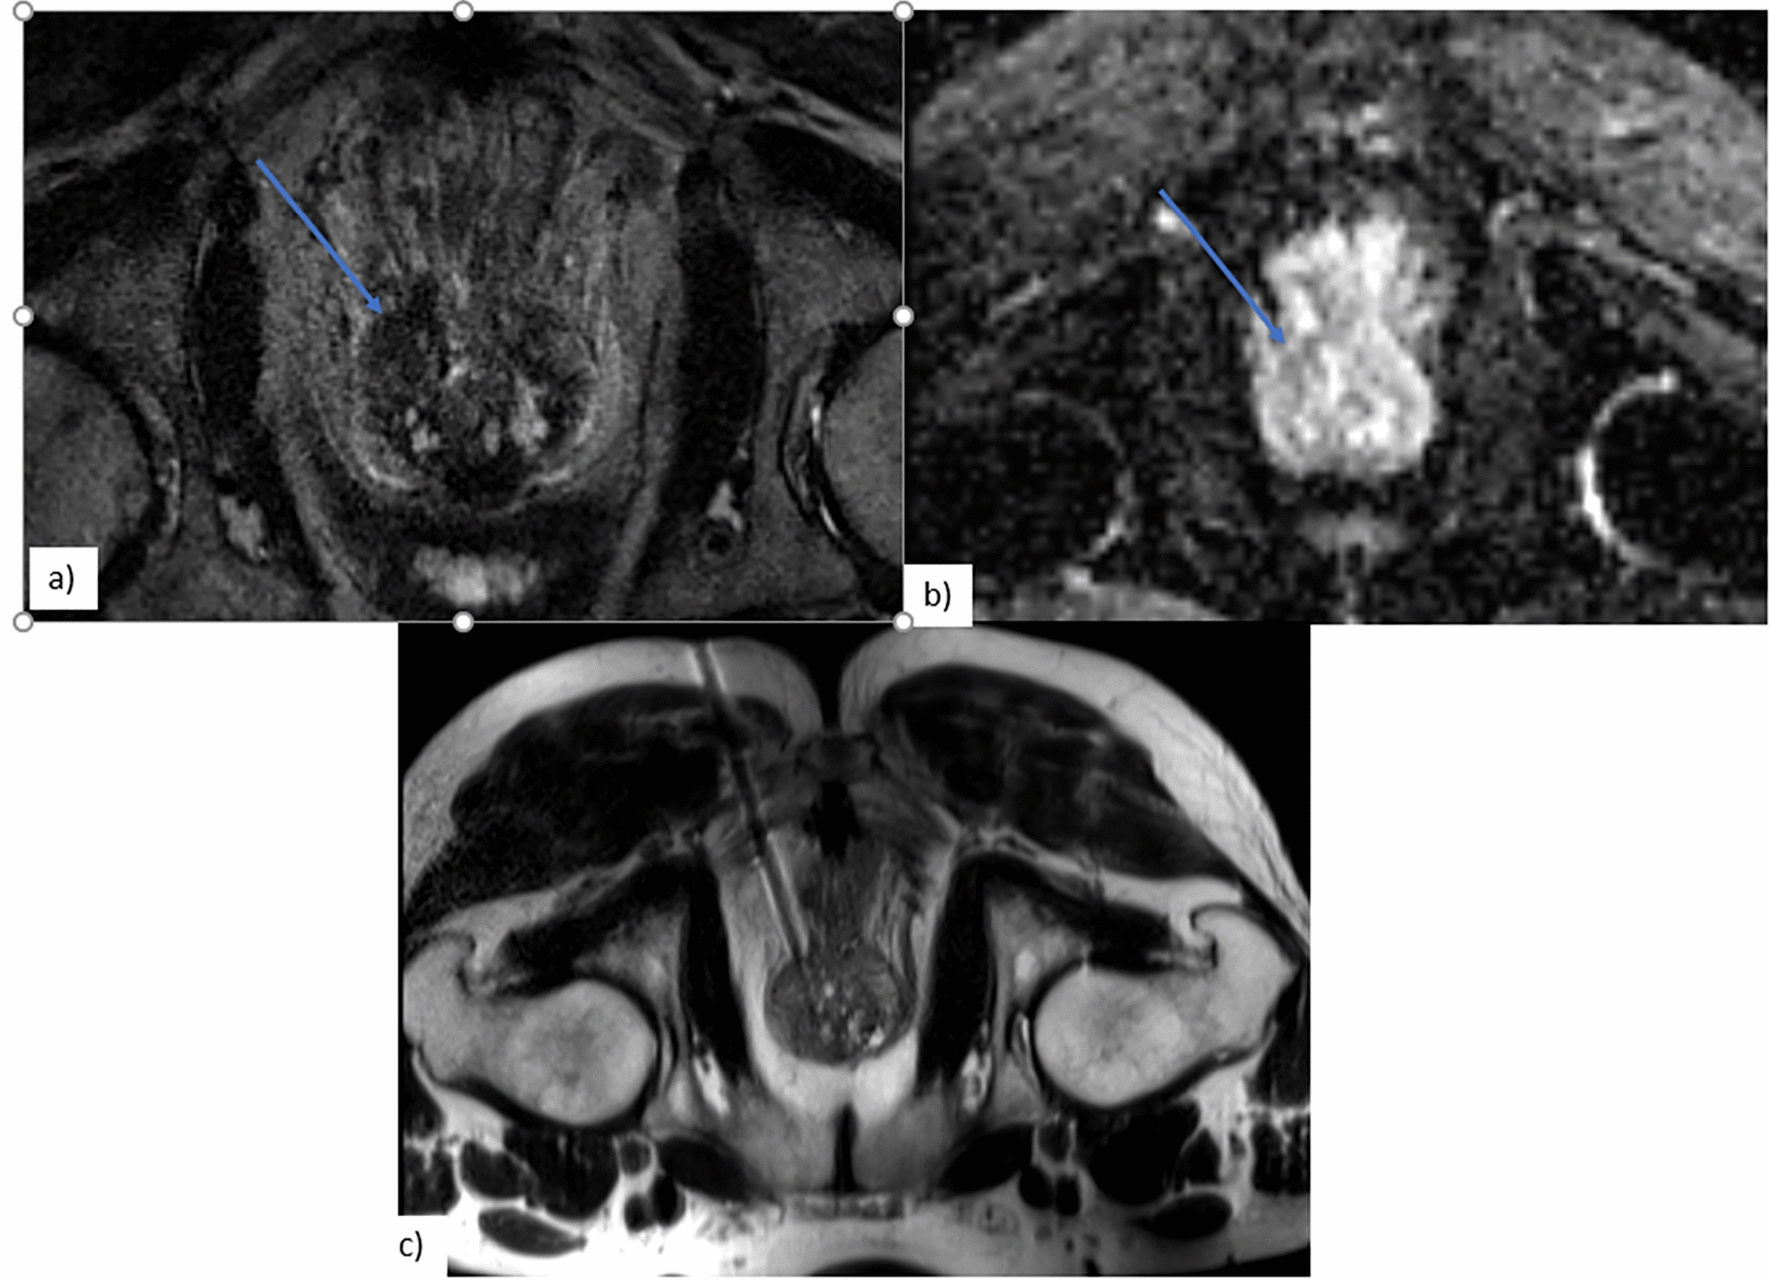 3.0-T MR-guided transgluteal in-bore-targeted prostate biopsy under local anesthesia in patients without rectal access: a single-institute experience and review of literature